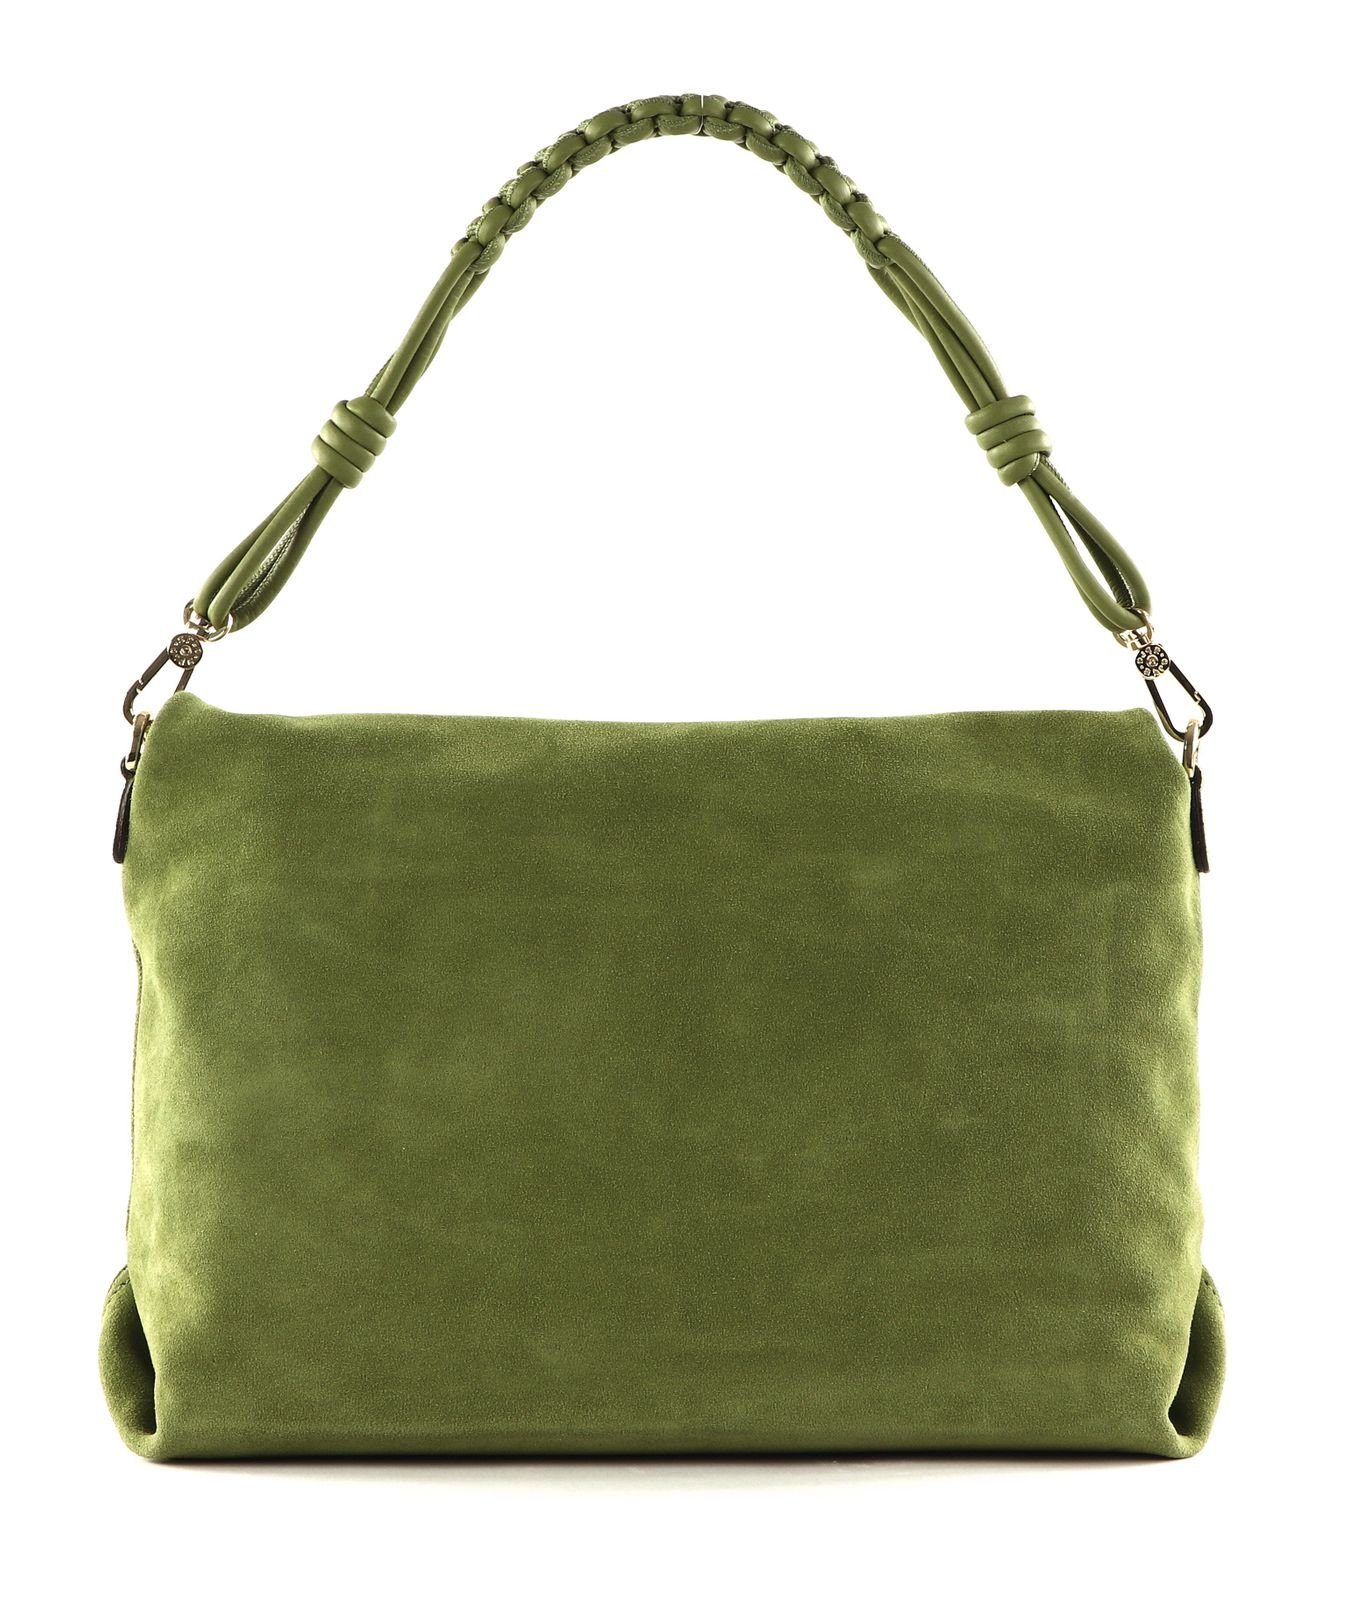 Abro Schultertasche Leather Suede Oliv